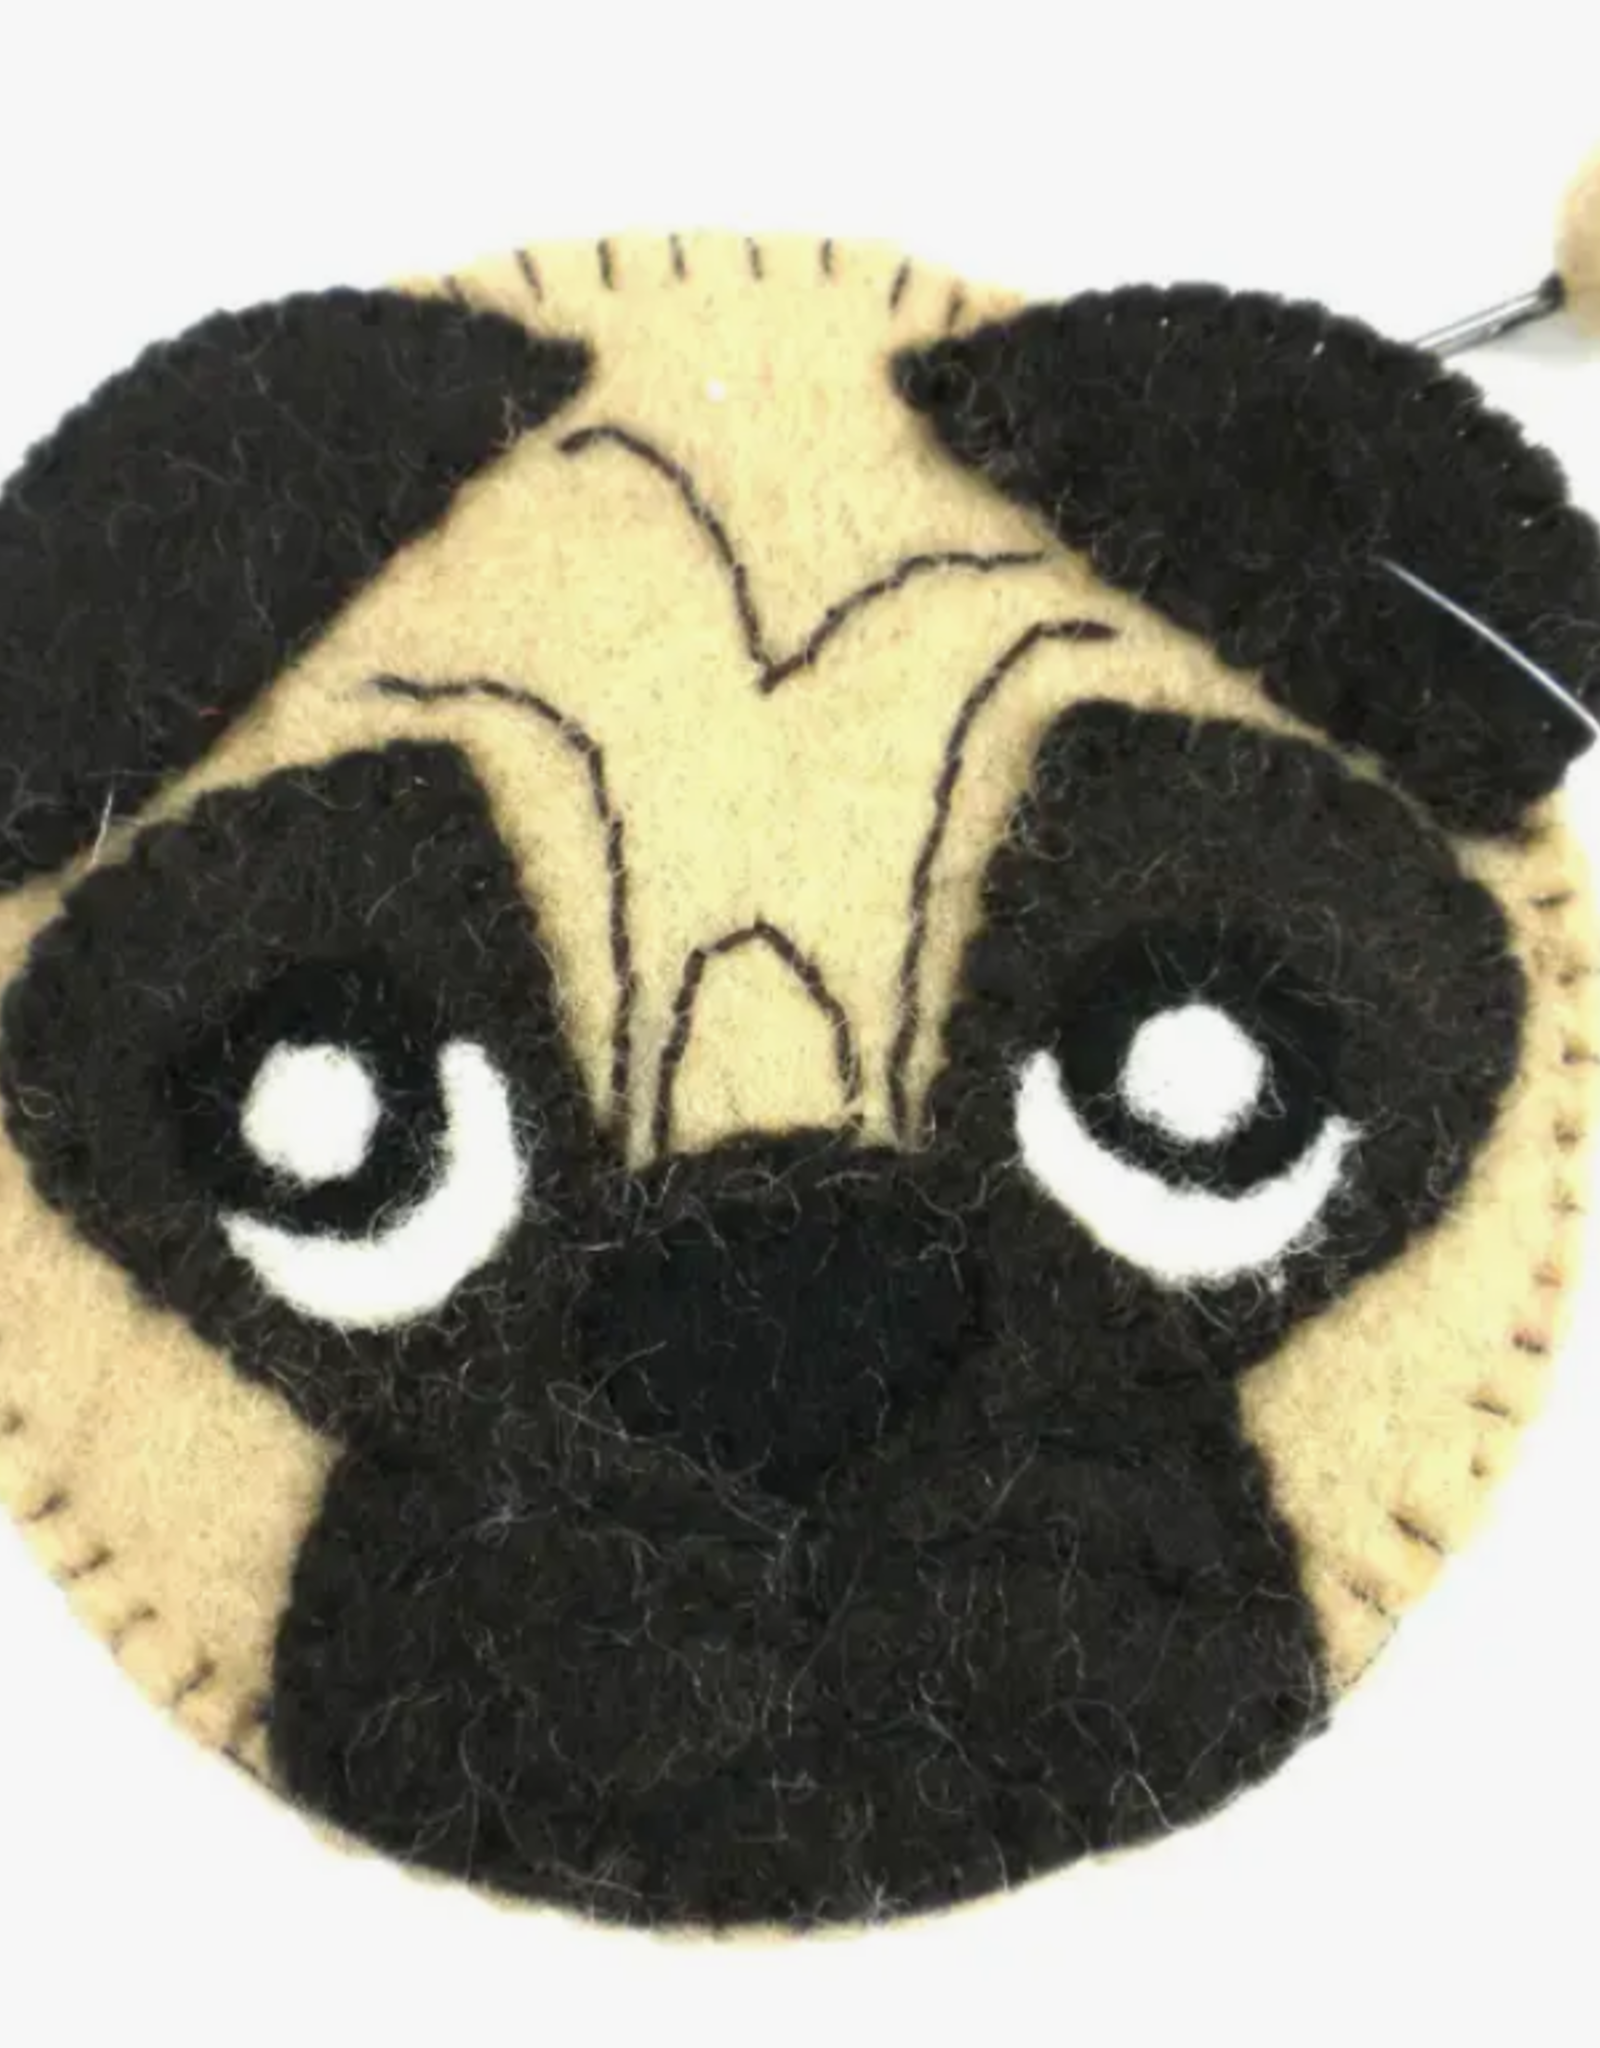 Global Crafts Felted Pug Puppy Zipper Pouch